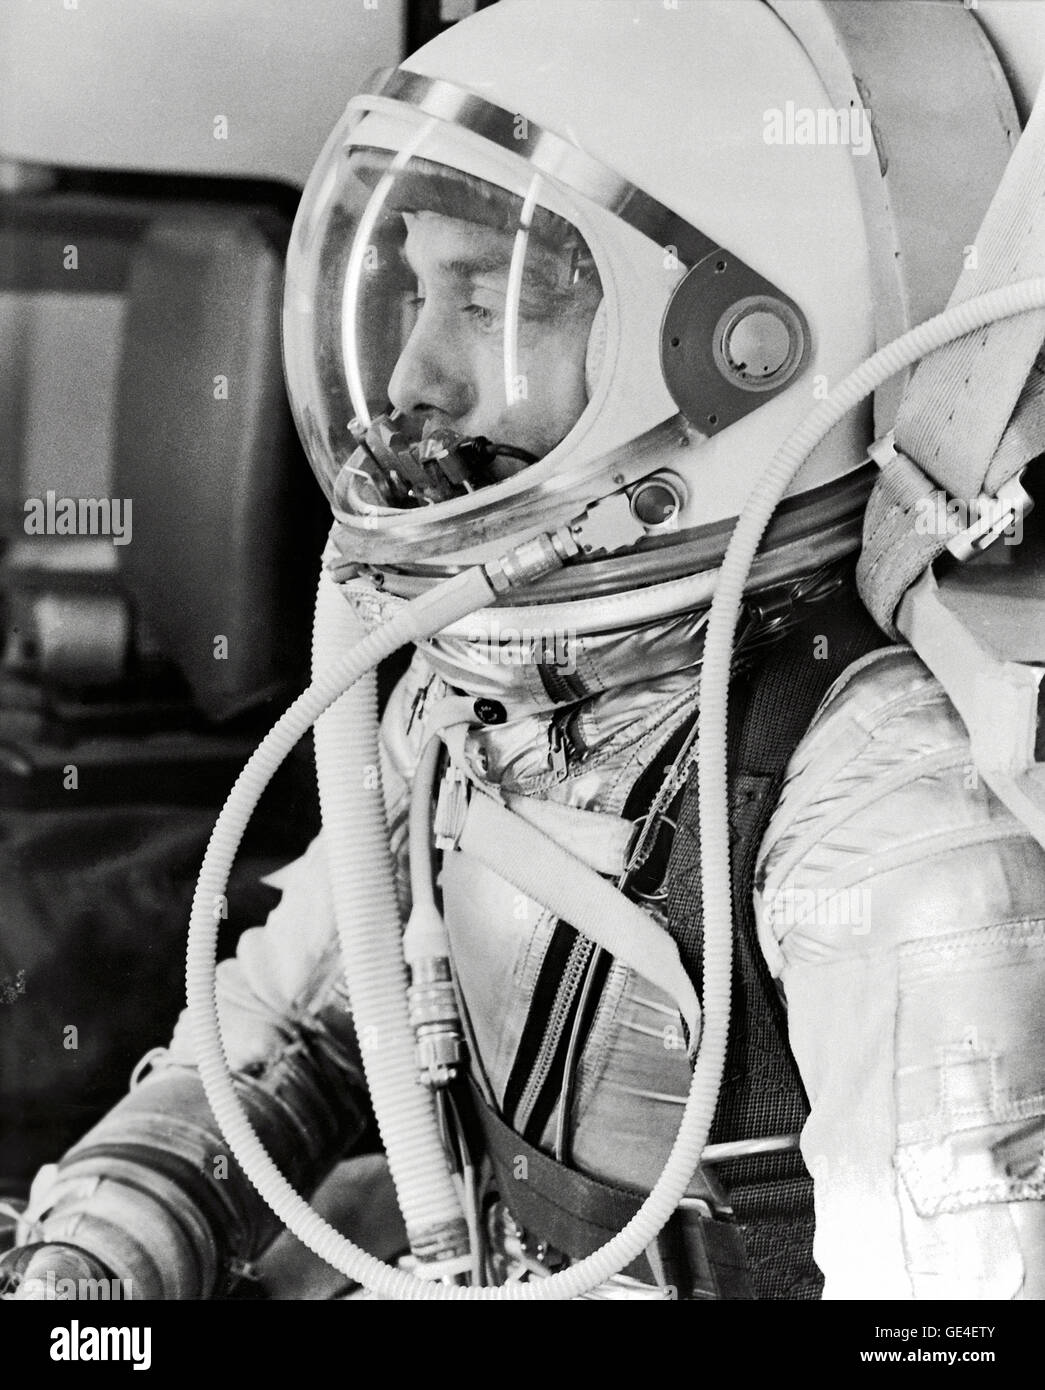 Profile of astronaut Alan Shepard in his silver pressure suit with the helmet visor closed as he prepares for his upcoming Mercury-Redstone 3 (MR-3) launch. On May 5th 1961, Alan B. Shepard Jr. became the first American to fly into space. His Freedom 7 Mercury capsule flew a suborbital trajectory lasting 15 minutes 22 seconds. His spacecraft splashed down in the Atlantic Ocean where he and Freedom 7 were recovered by helicopter and transported to the awaiting aircraft carrier U.S.S. Lake Champlain.  Image # : S61-02766  Date: May 5, 1961 Stock Photo